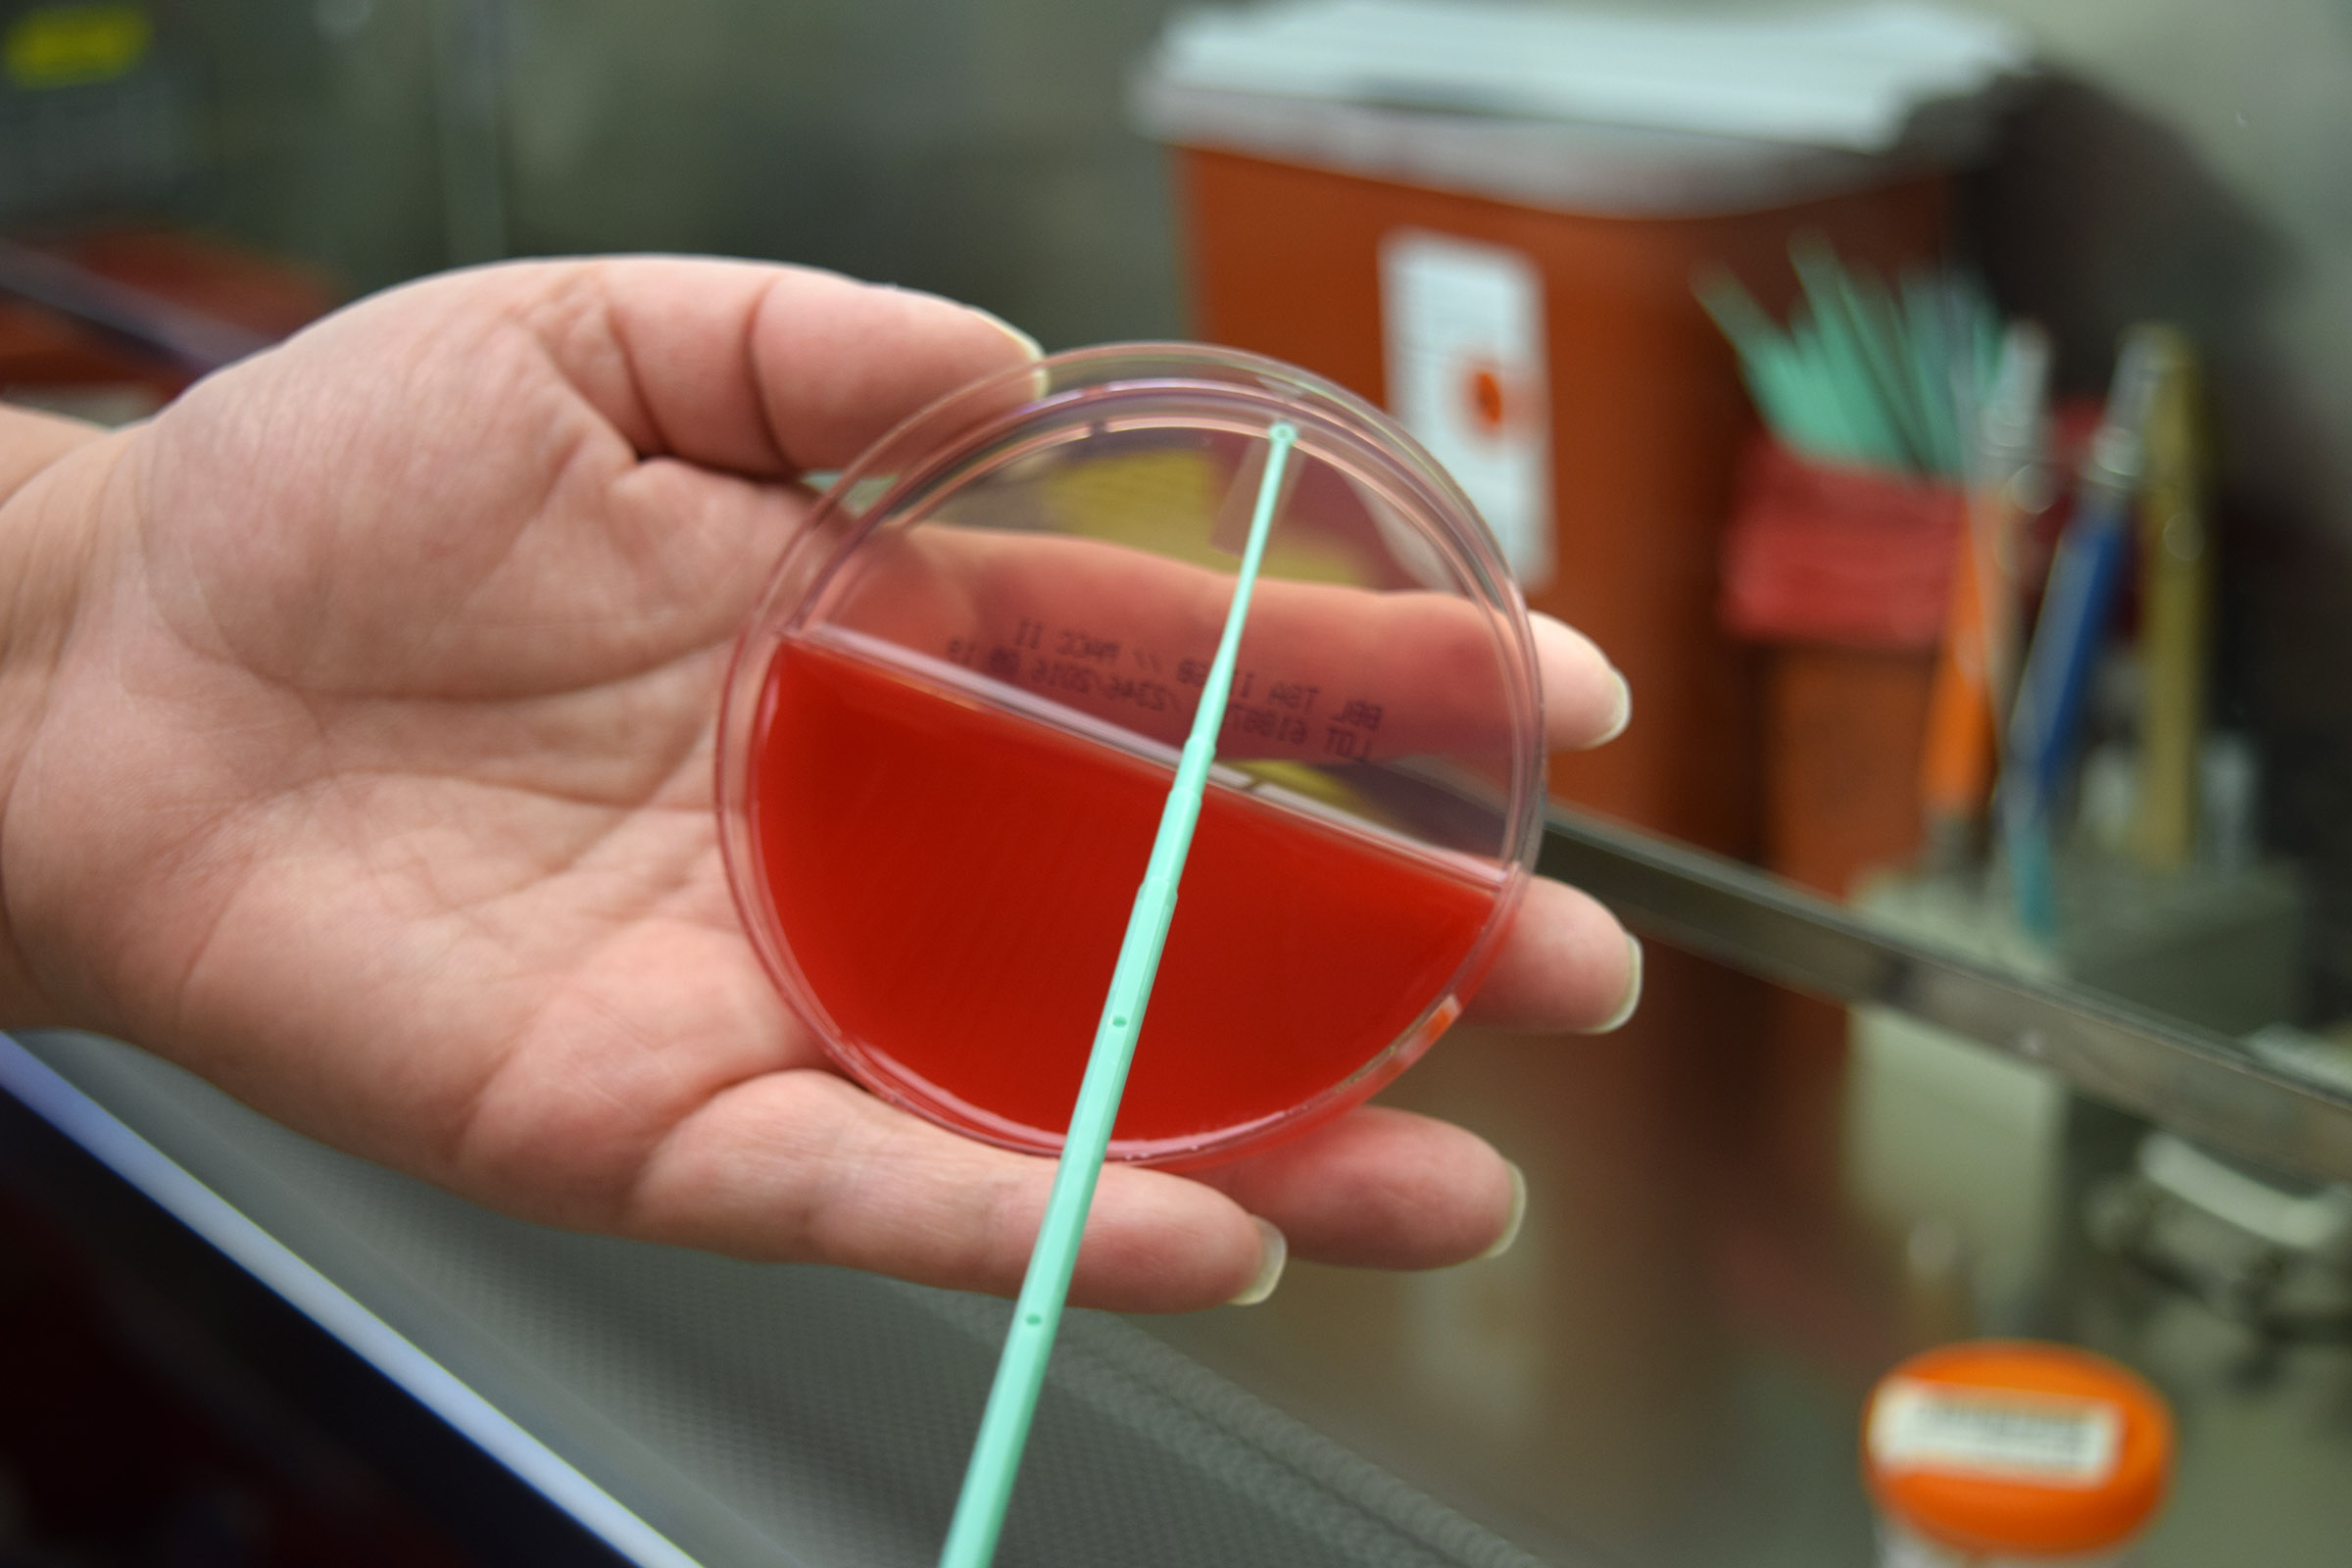 A Look Inside the Bacteriology Lab: What Does Your Culture Grow? 